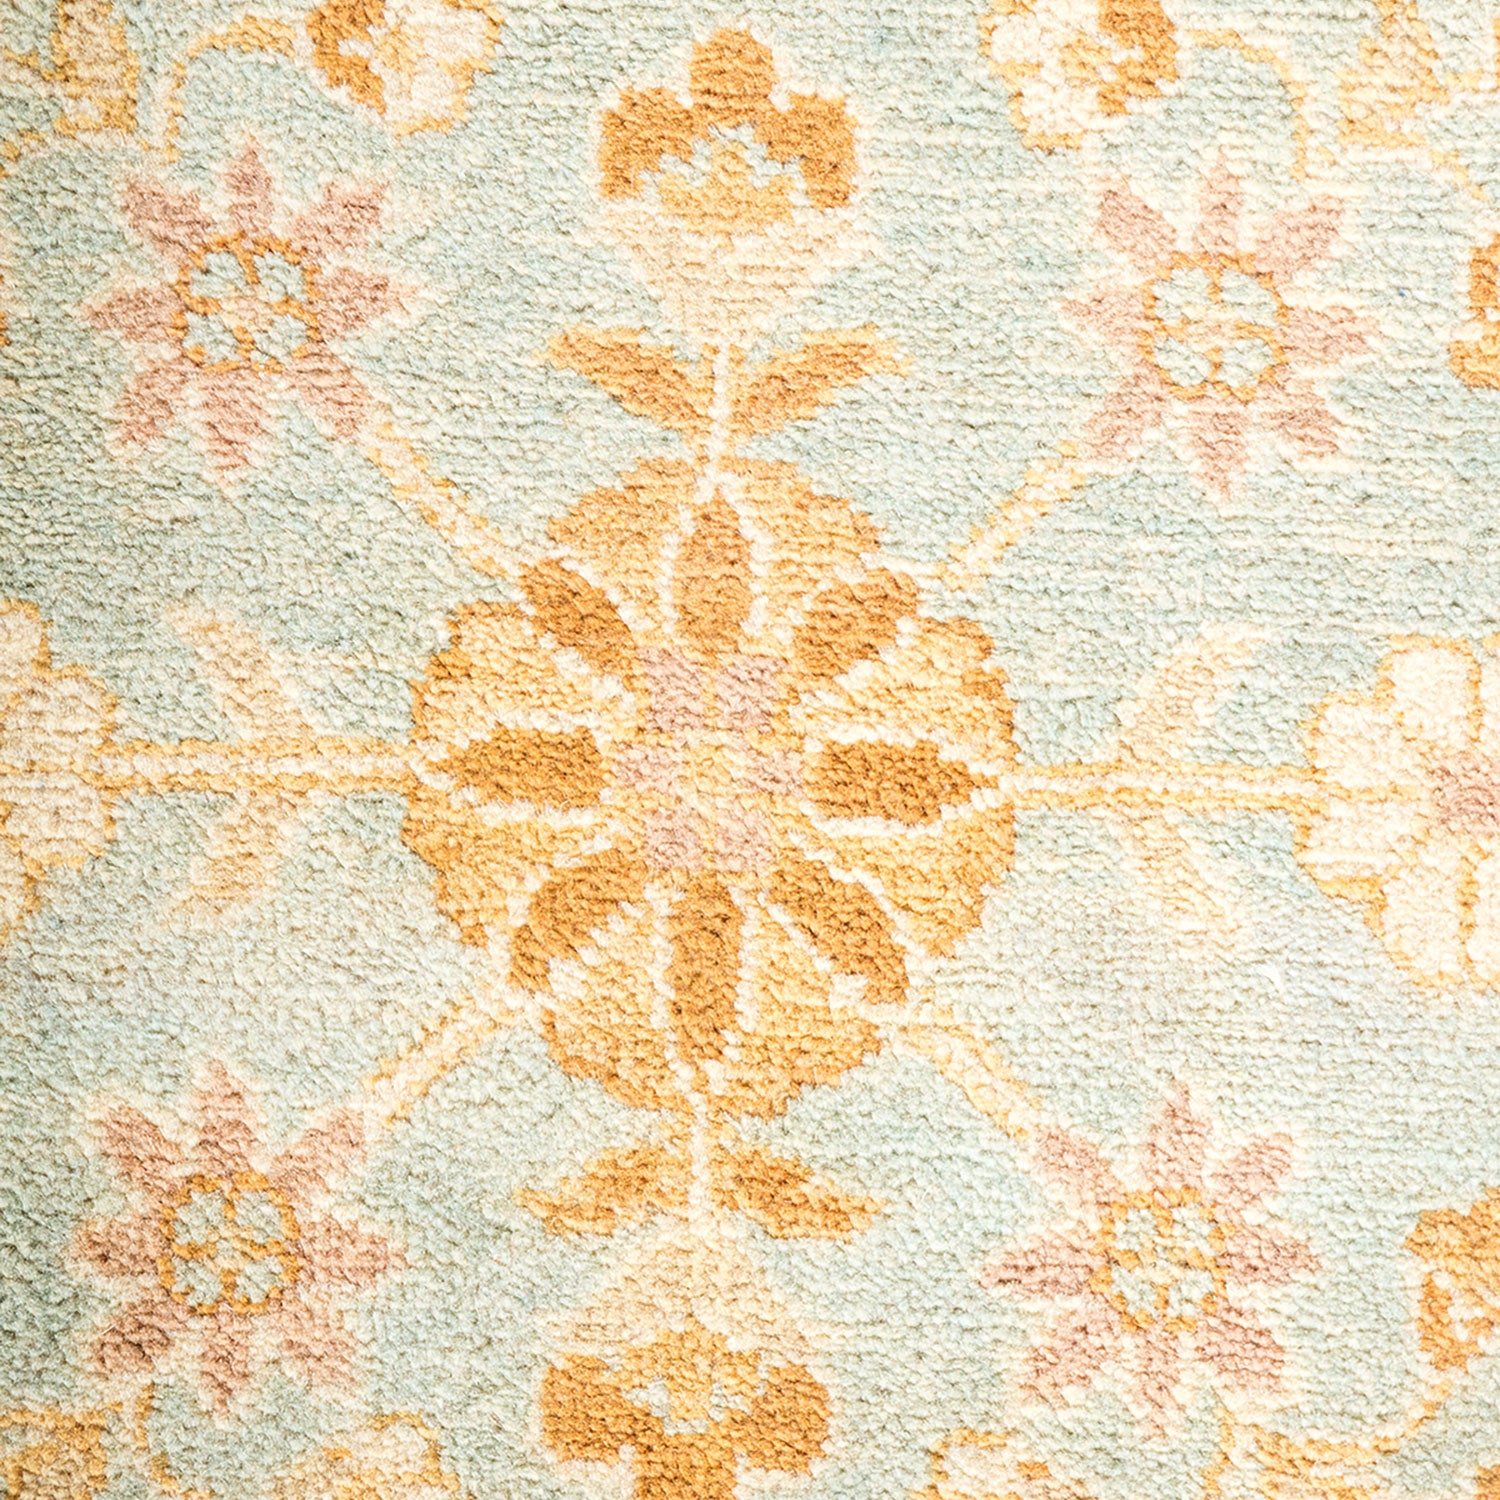 Close-up of a floral and symmetrical patterned carpet in soft, elegant colors.